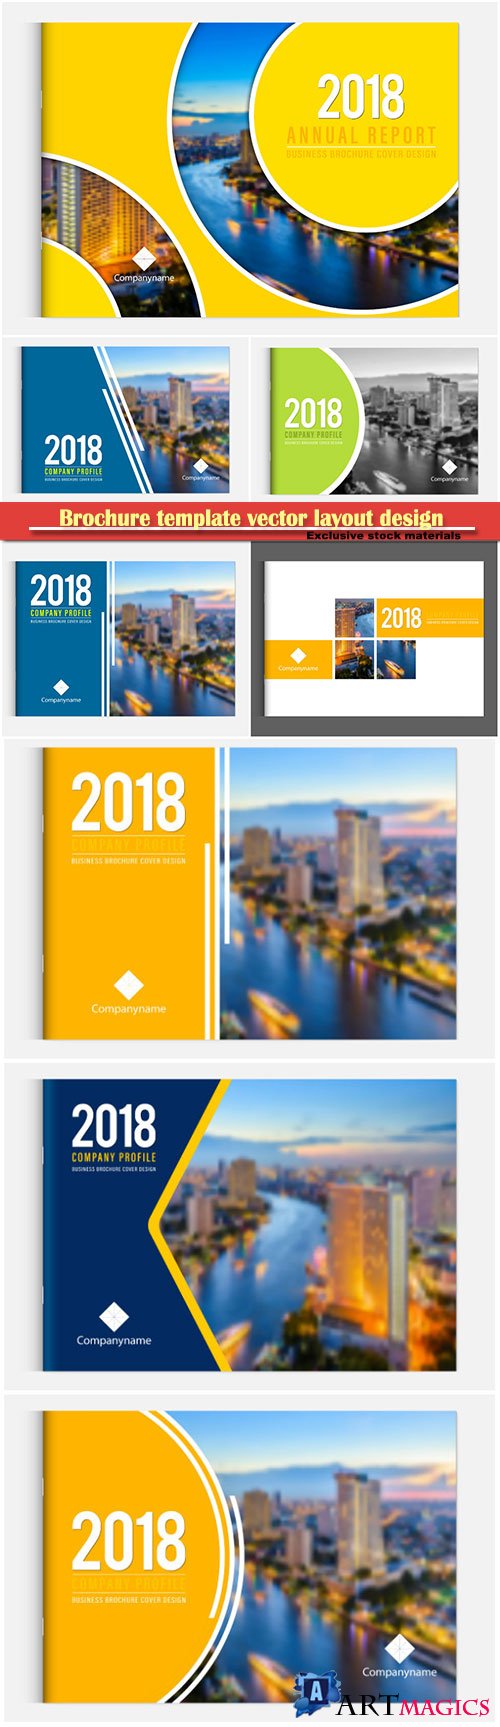 Brochure template vector layout design, corporate business annual report, magazine, flyer mockup # 158